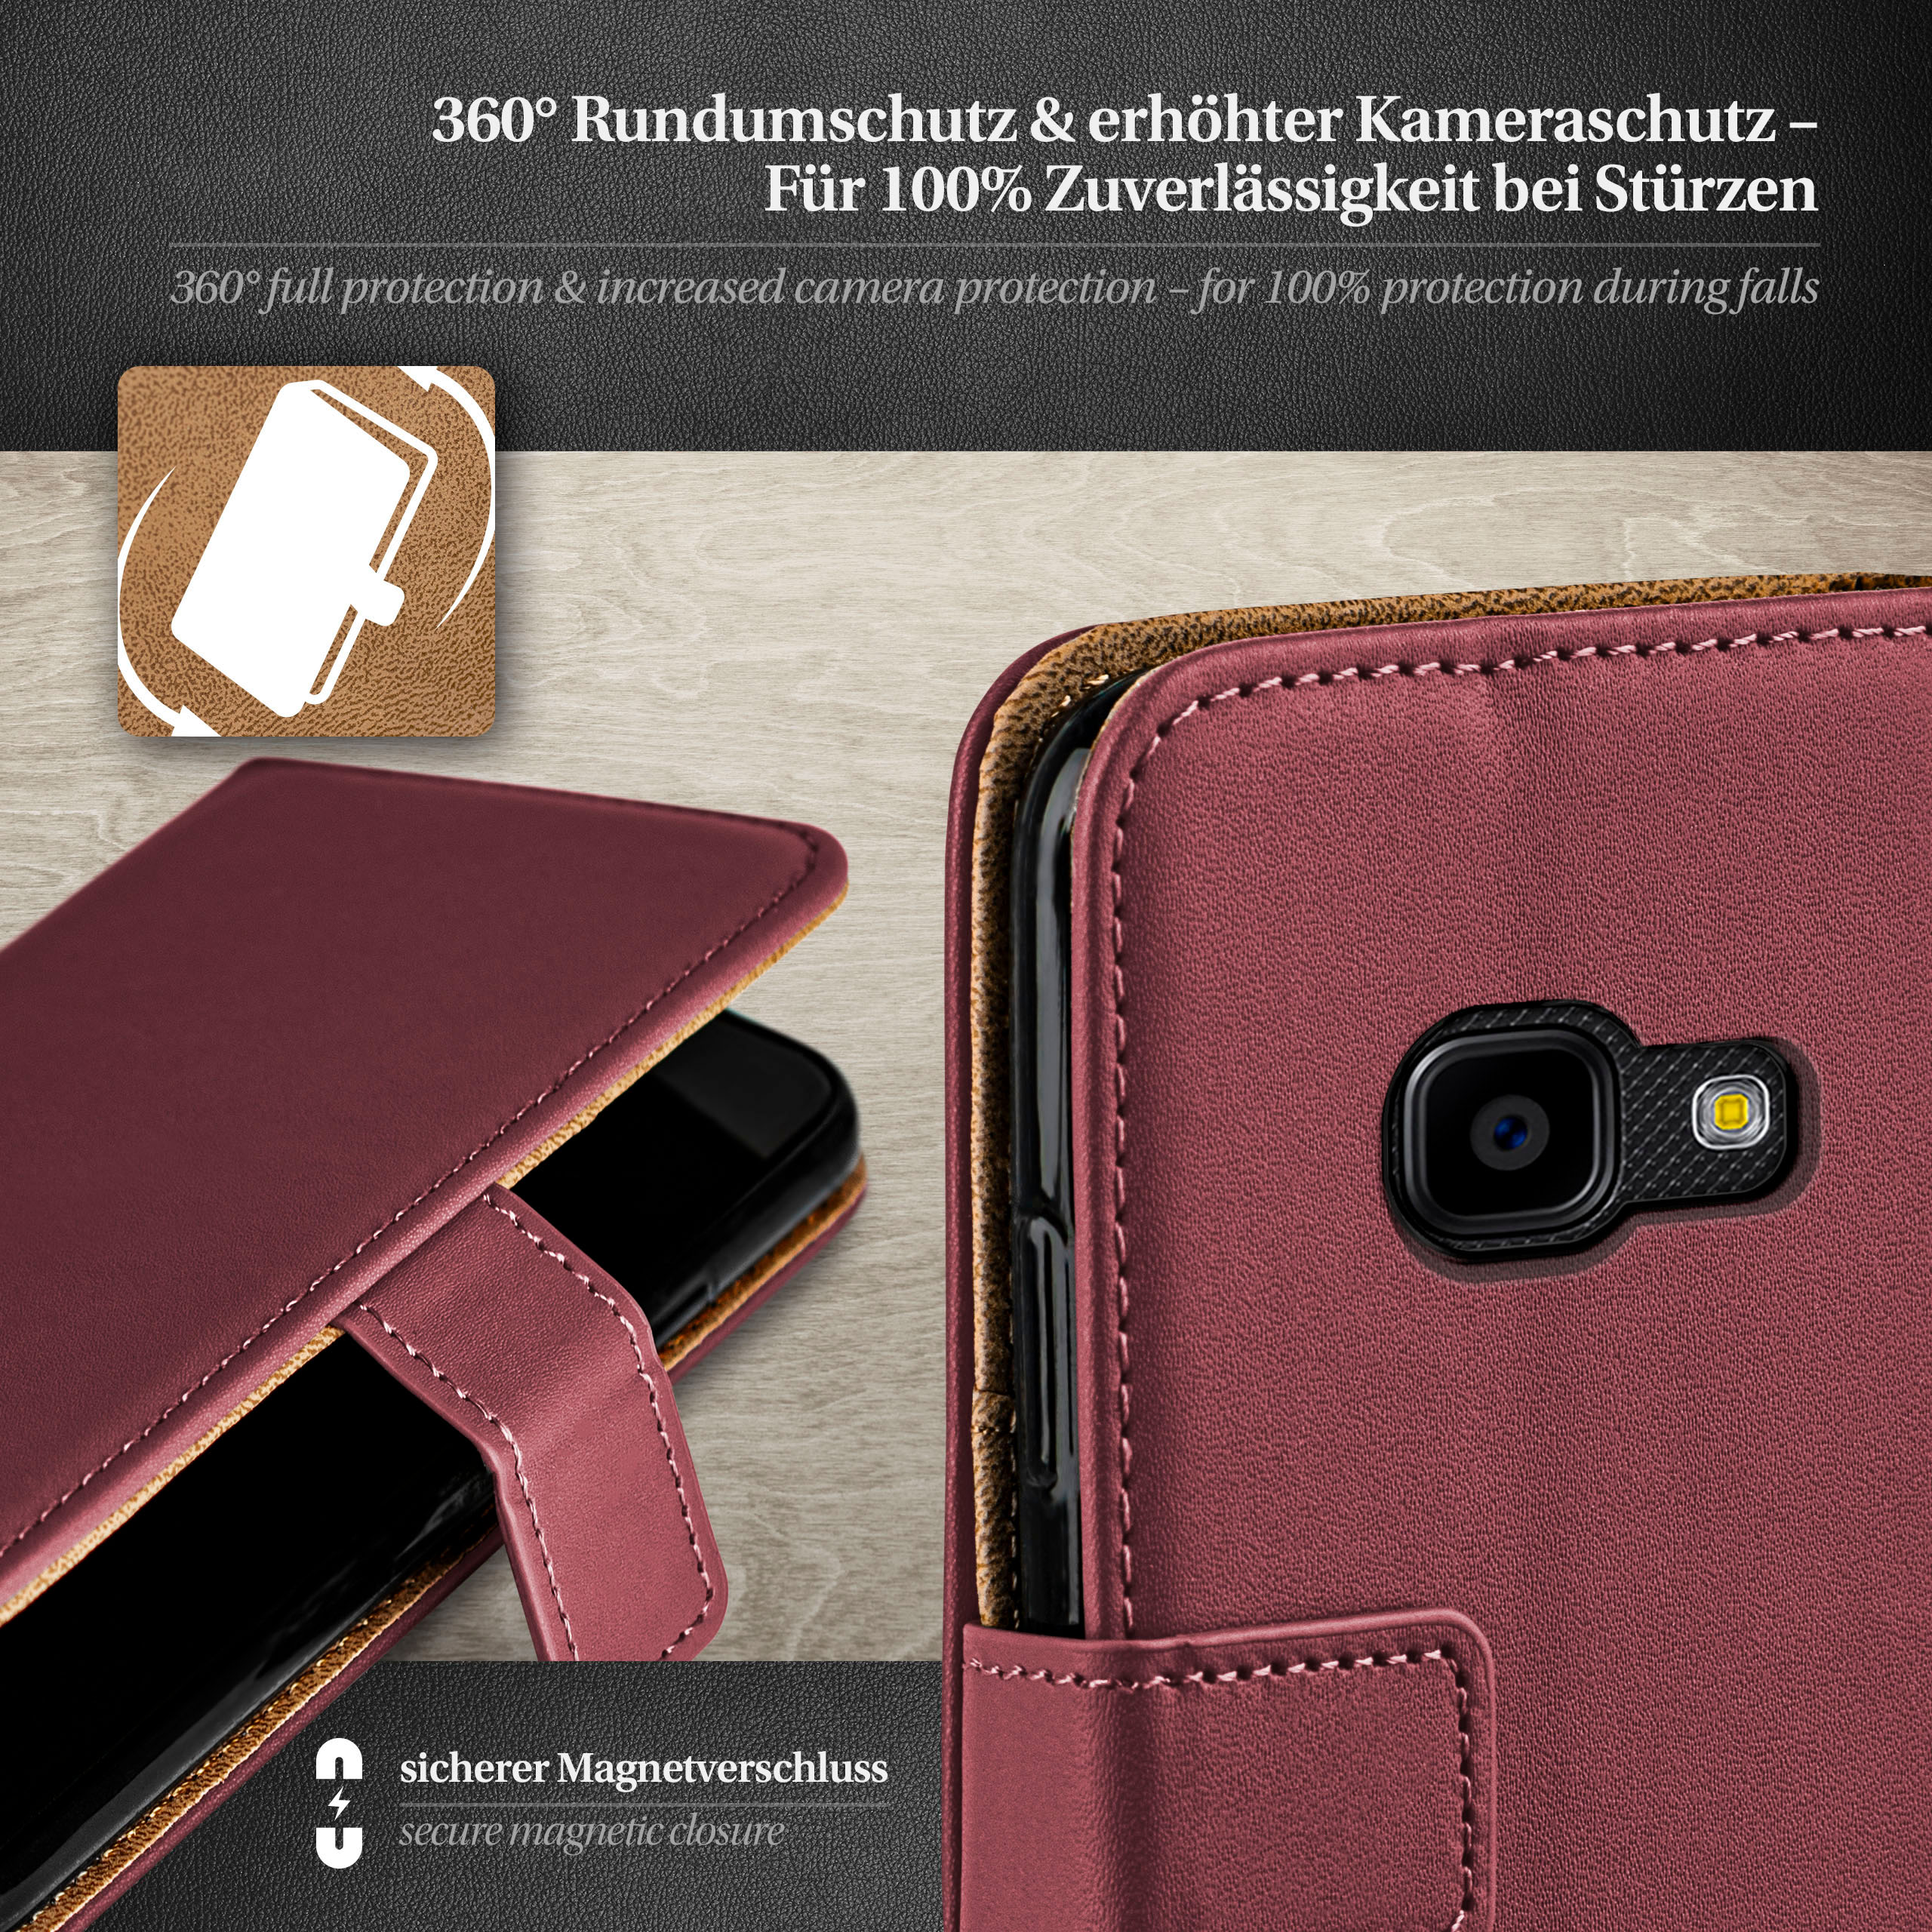 Case, MOEX Bookcover, Galaxy Book Maroon-Red 4, Xcover Samsung,